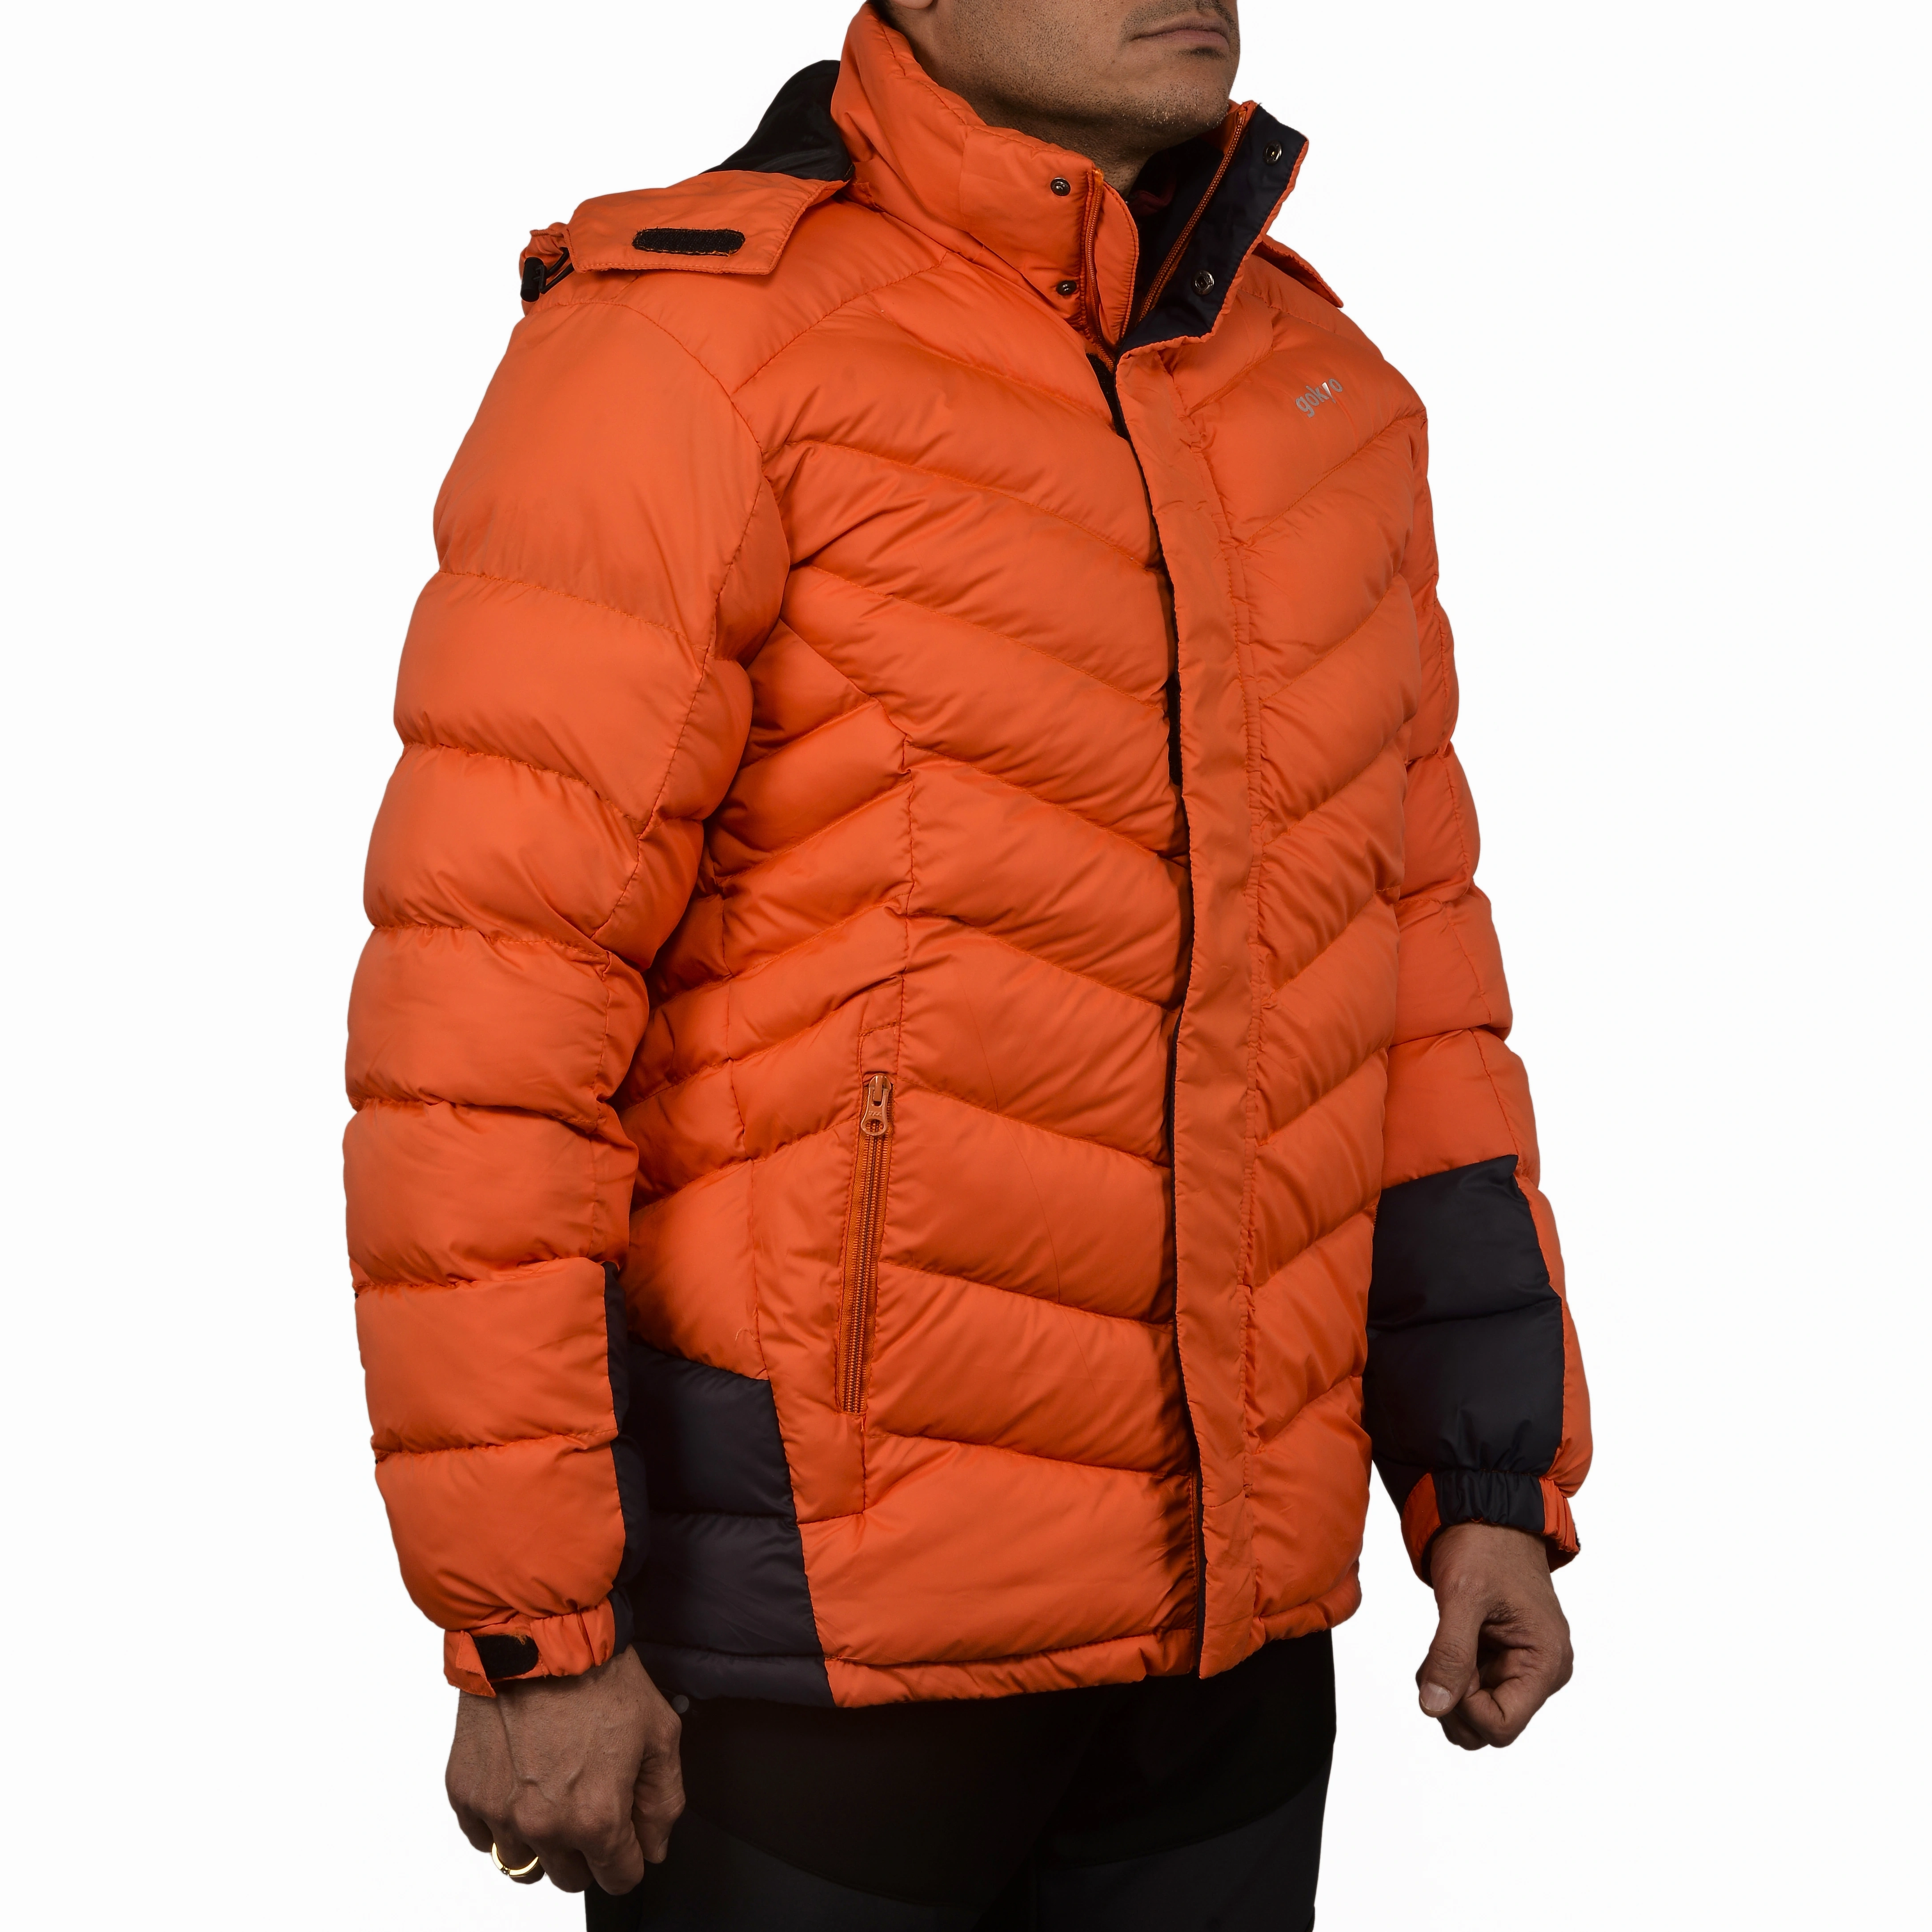 K2 Survivor Down Jacket for Men: Stylized Functionality for Extreme Cold Weather Expeditions (Up to -20°C)-Orange-XS-1